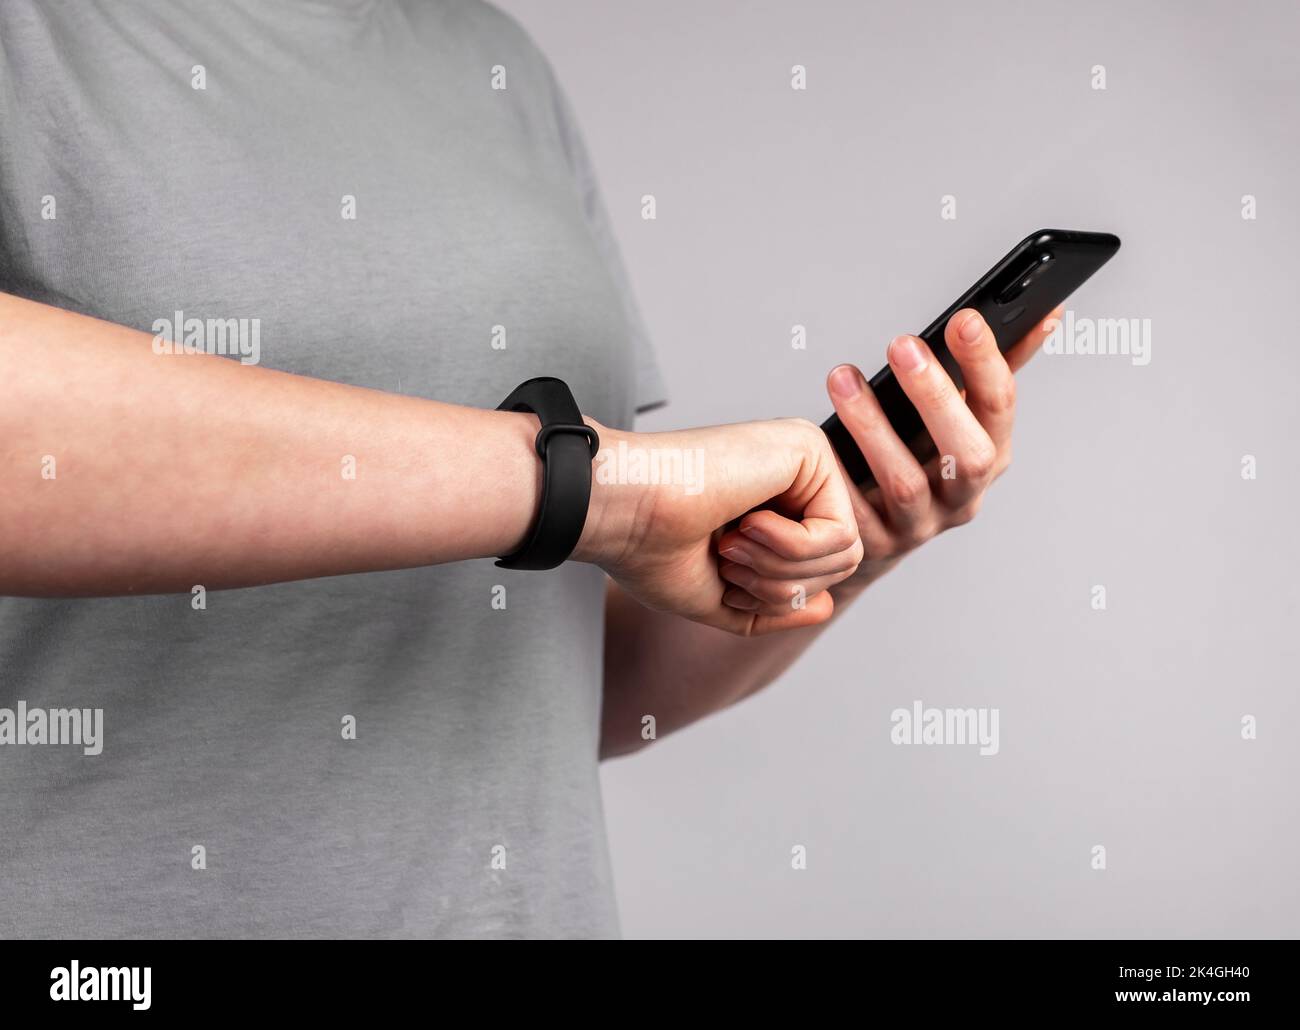 Mobile phone application for sport and smart fitness bracelet, smartwatches sync. Stock Photo